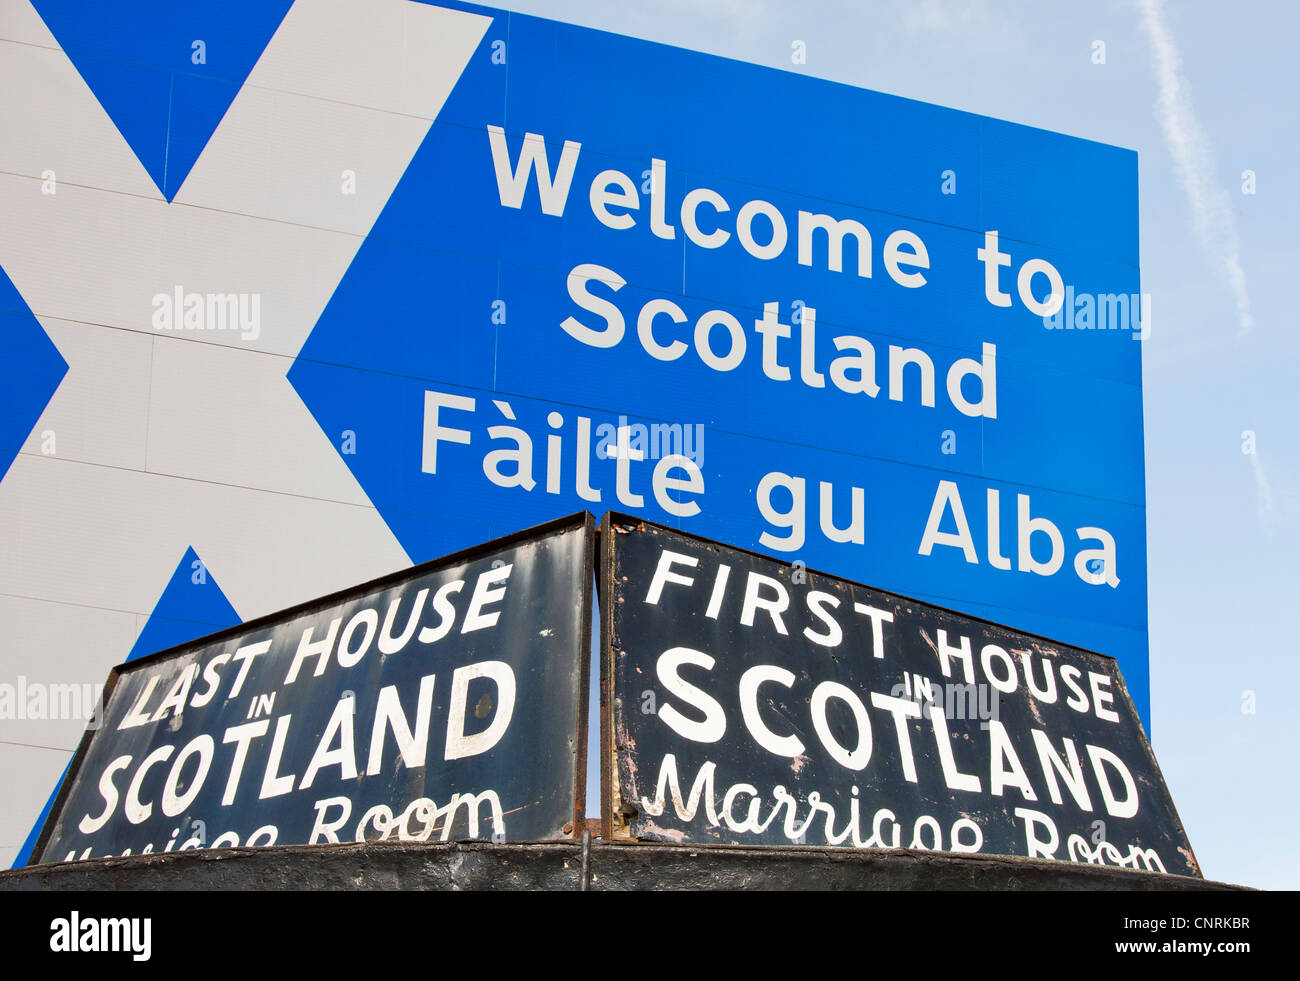 A welcome to Scotland sign and the first and last house at Gretna Green, Dumfries and Galloway, Scotland, UK. Stock Photo